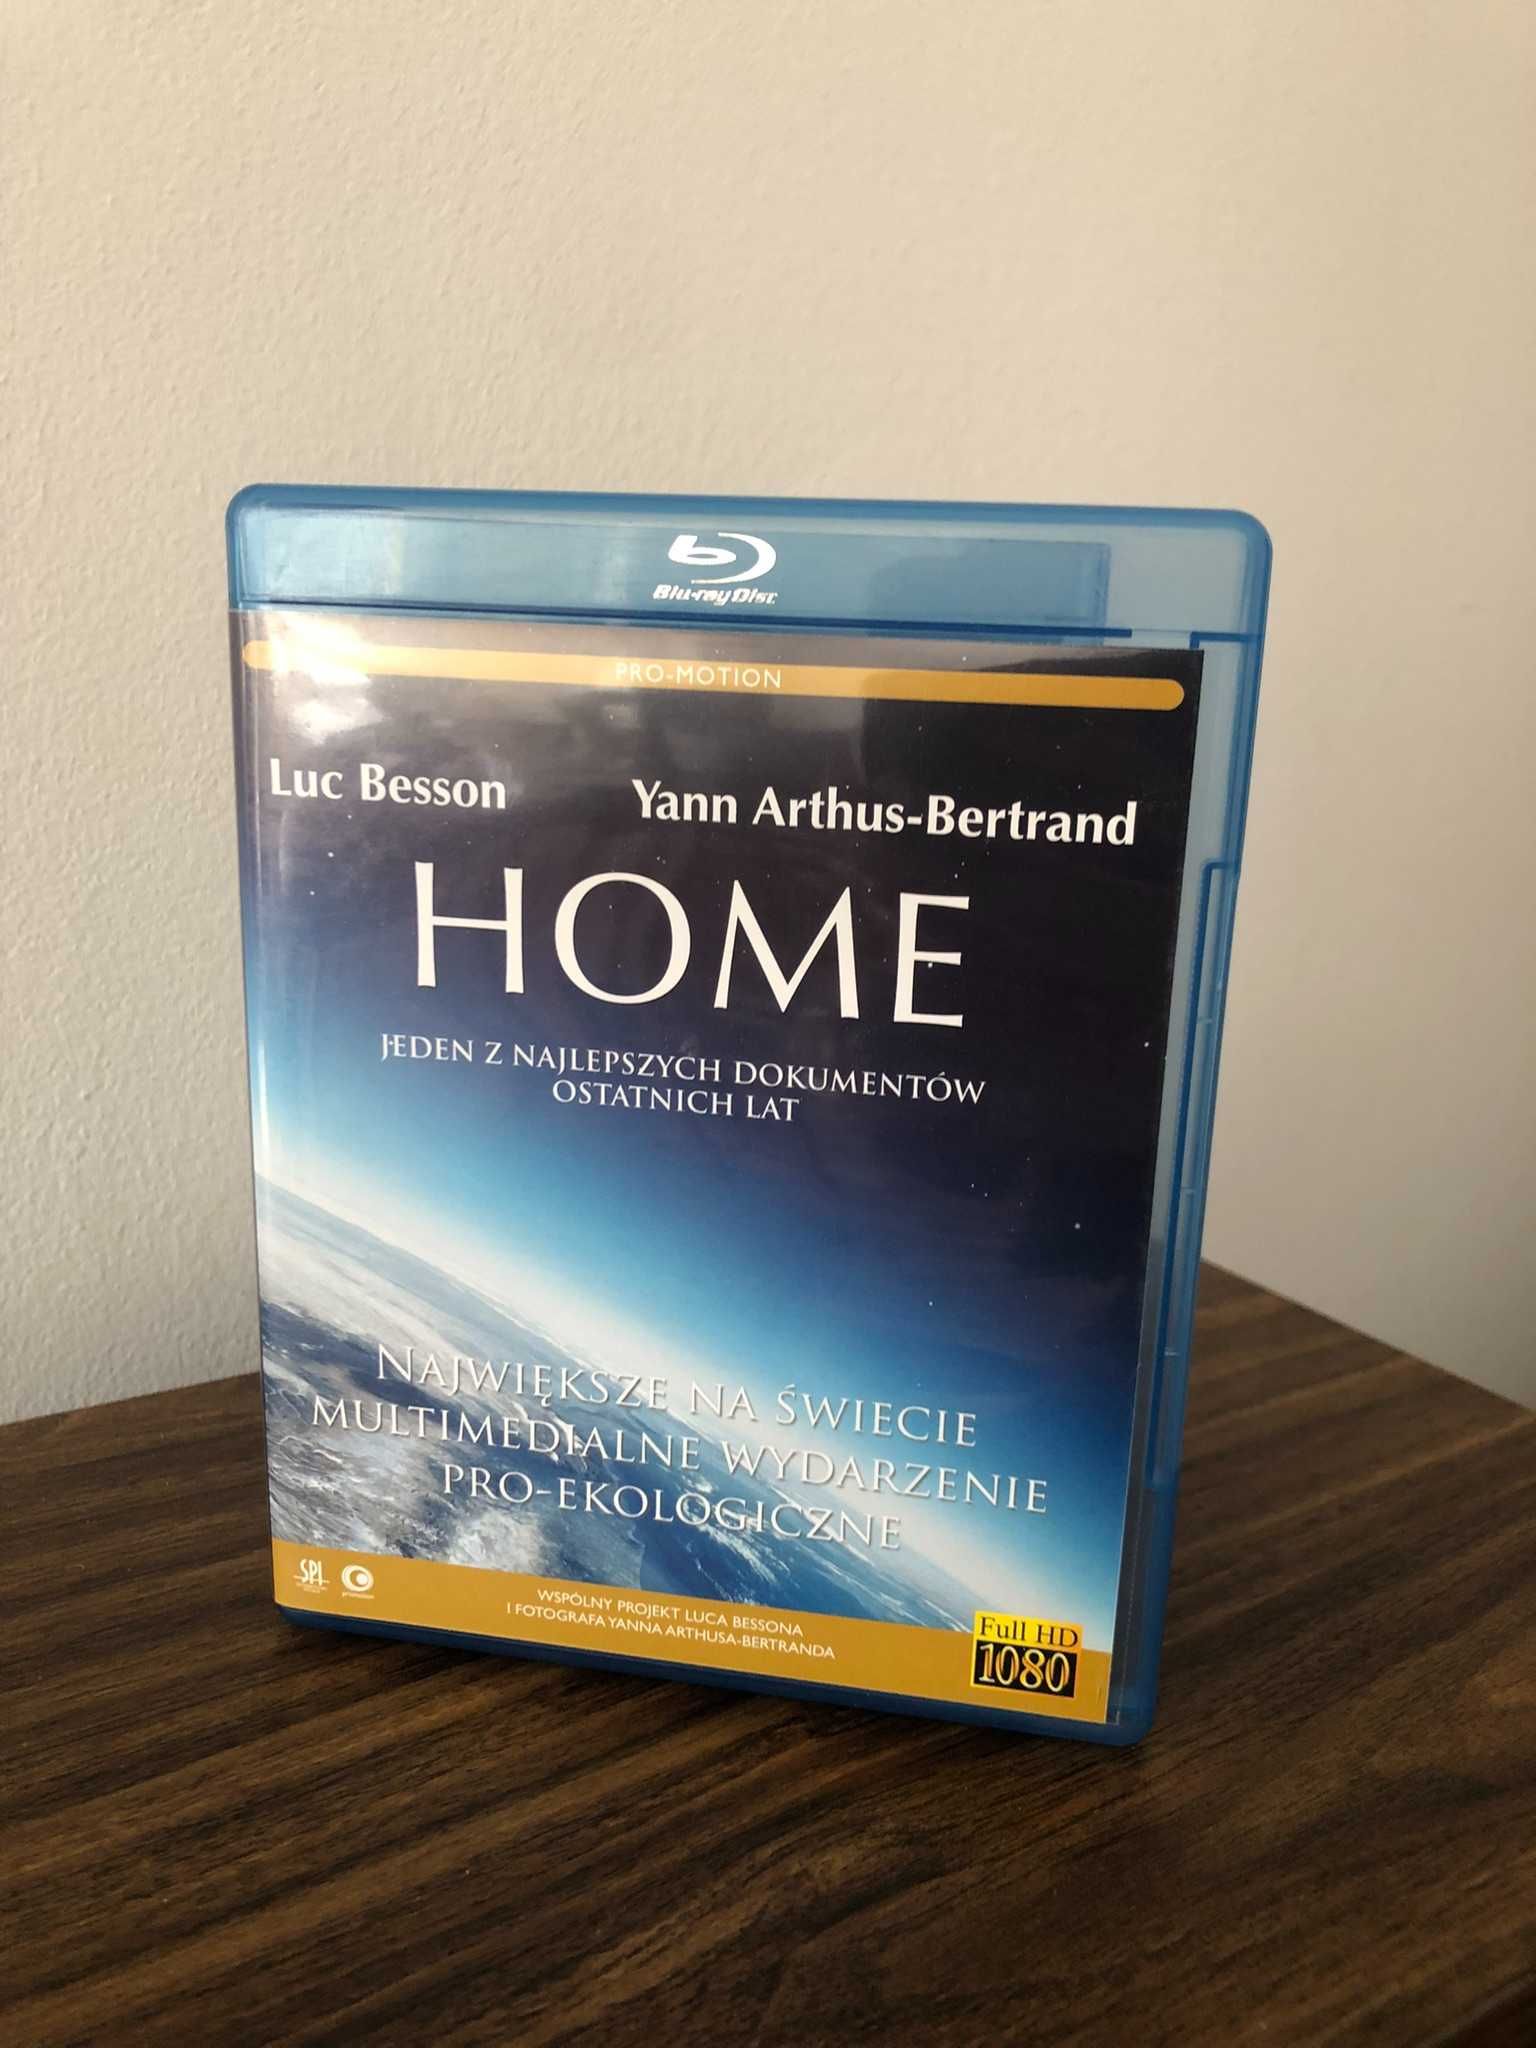 HOME Blu-Ray  Luc Besson